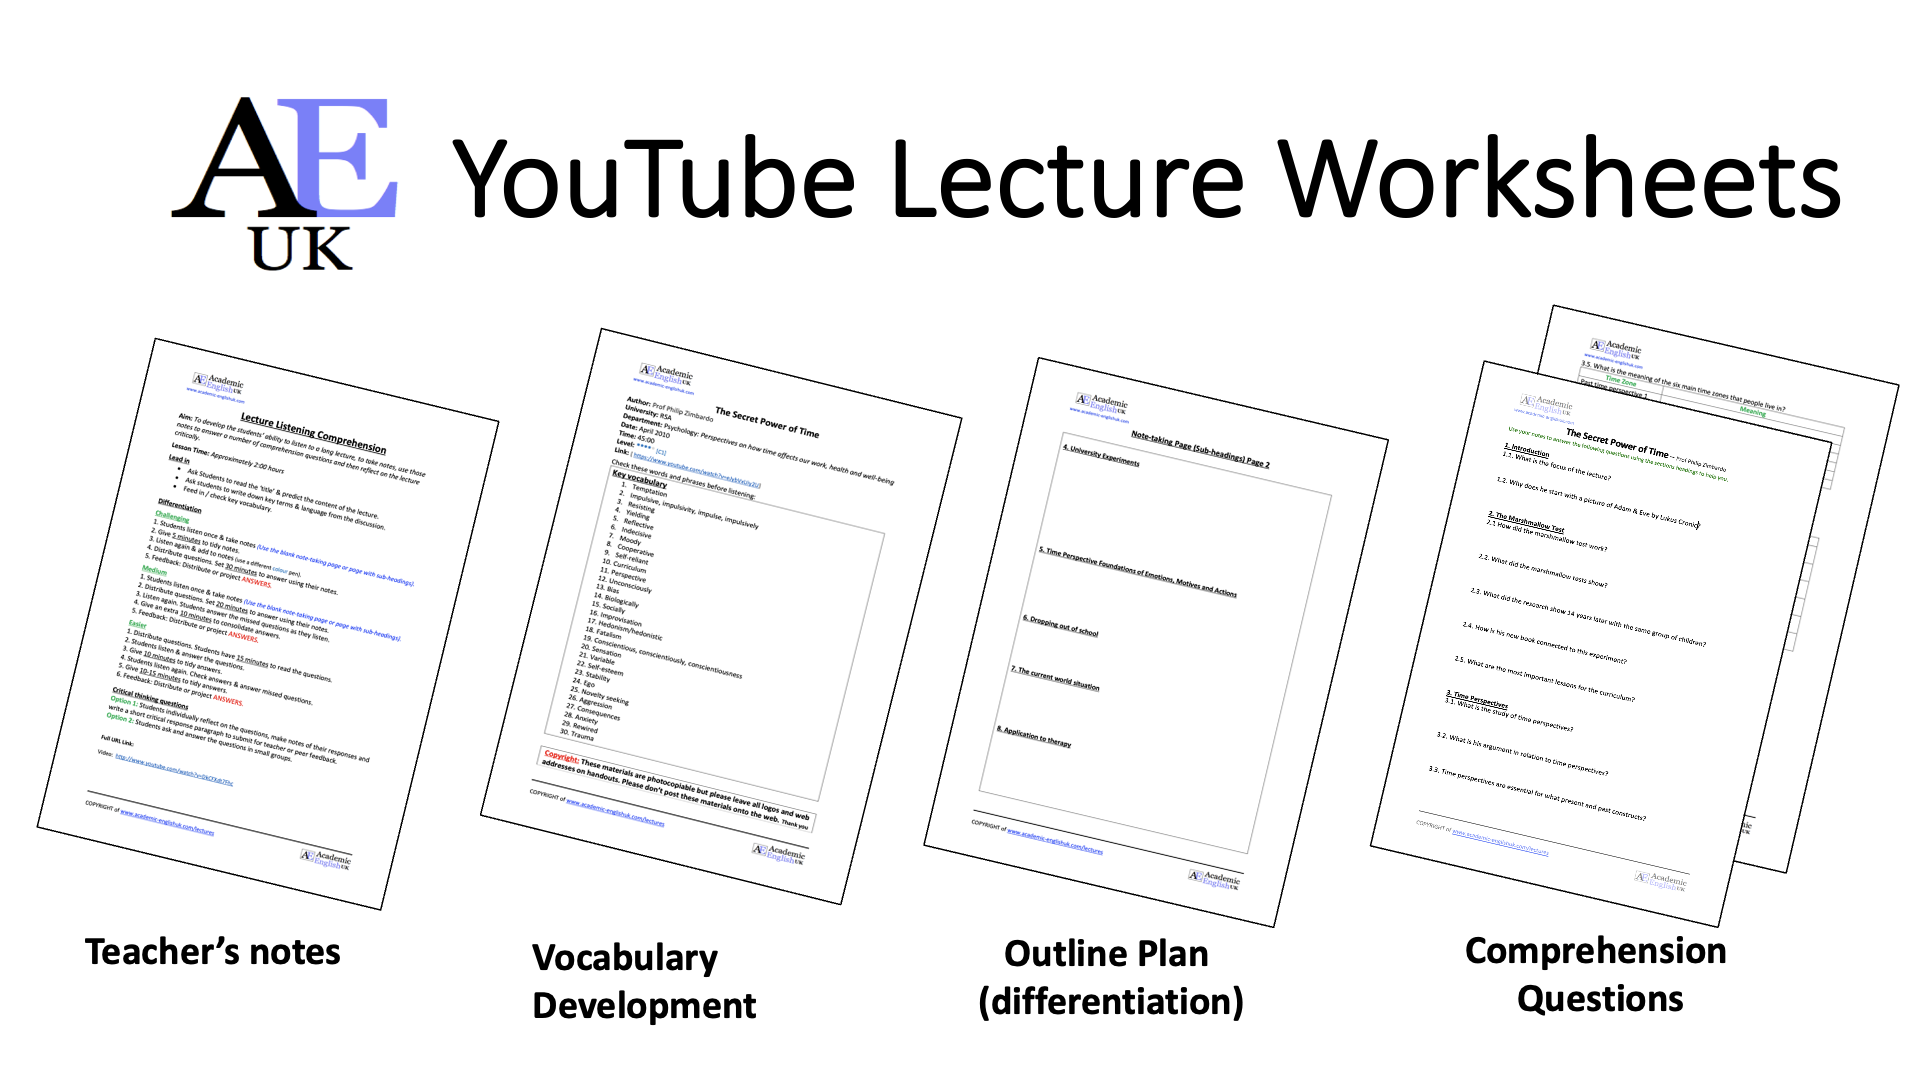 YouTube lecture worksheets